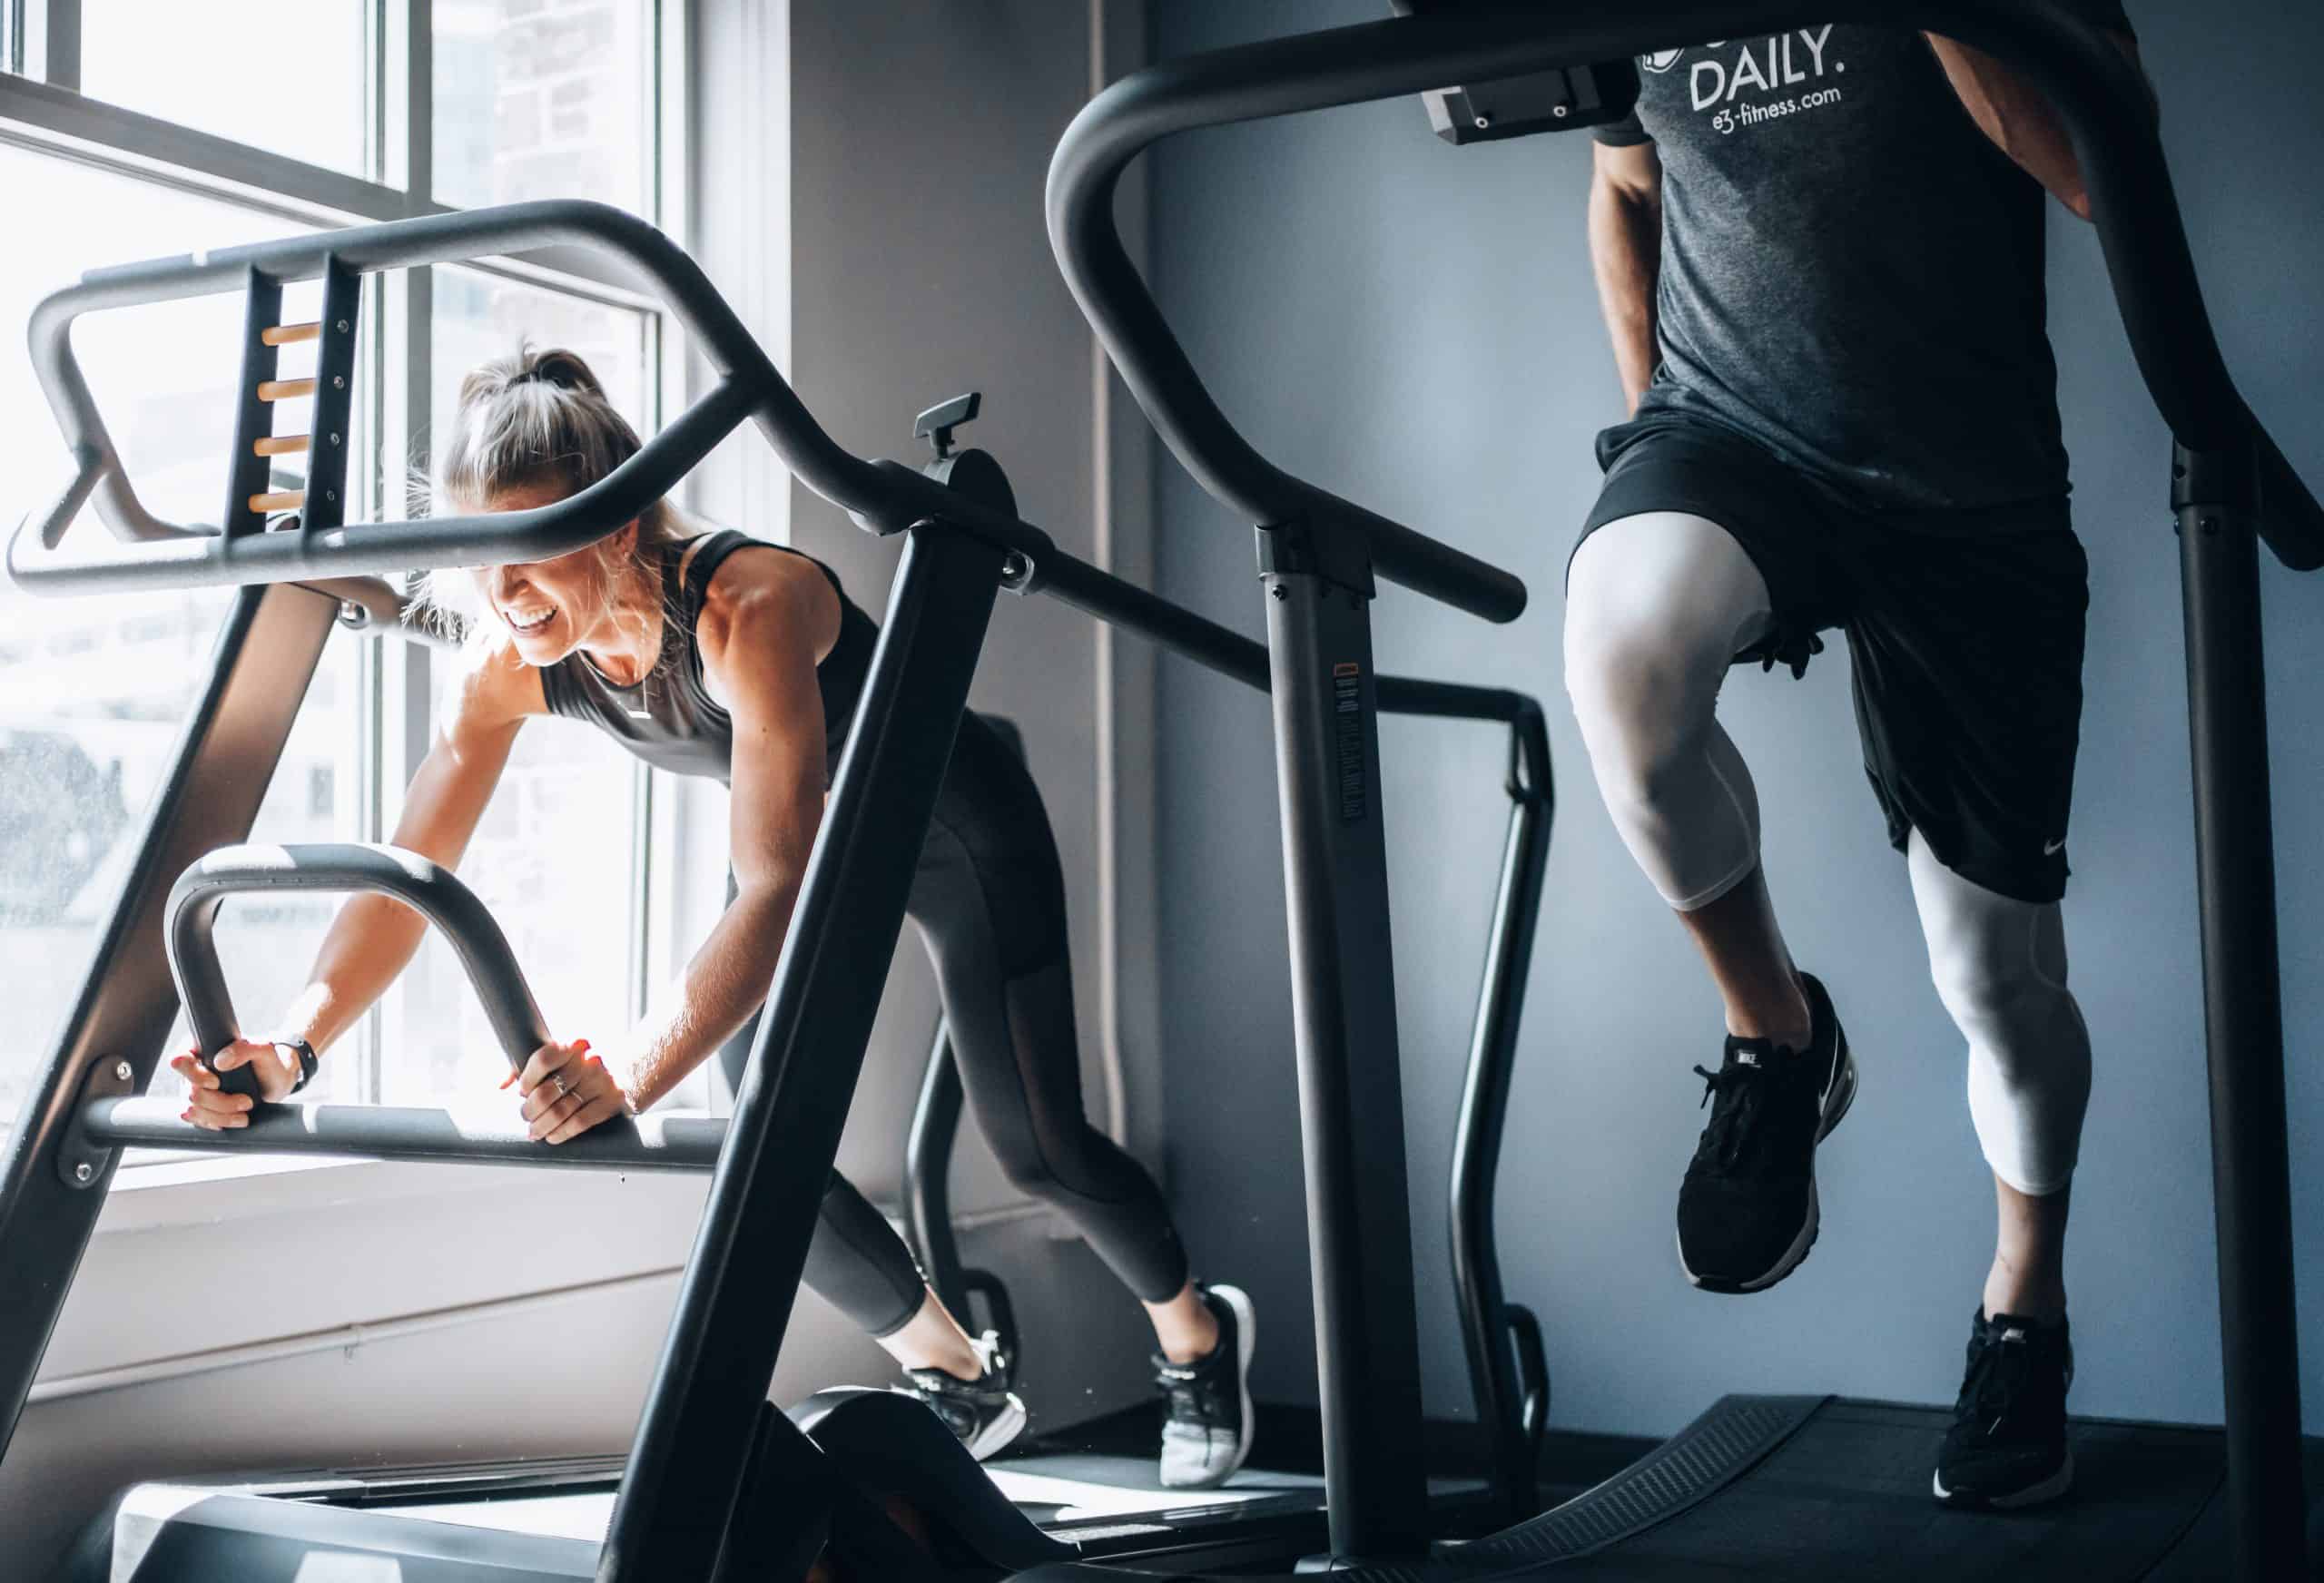 Image of people working out on a treadmill